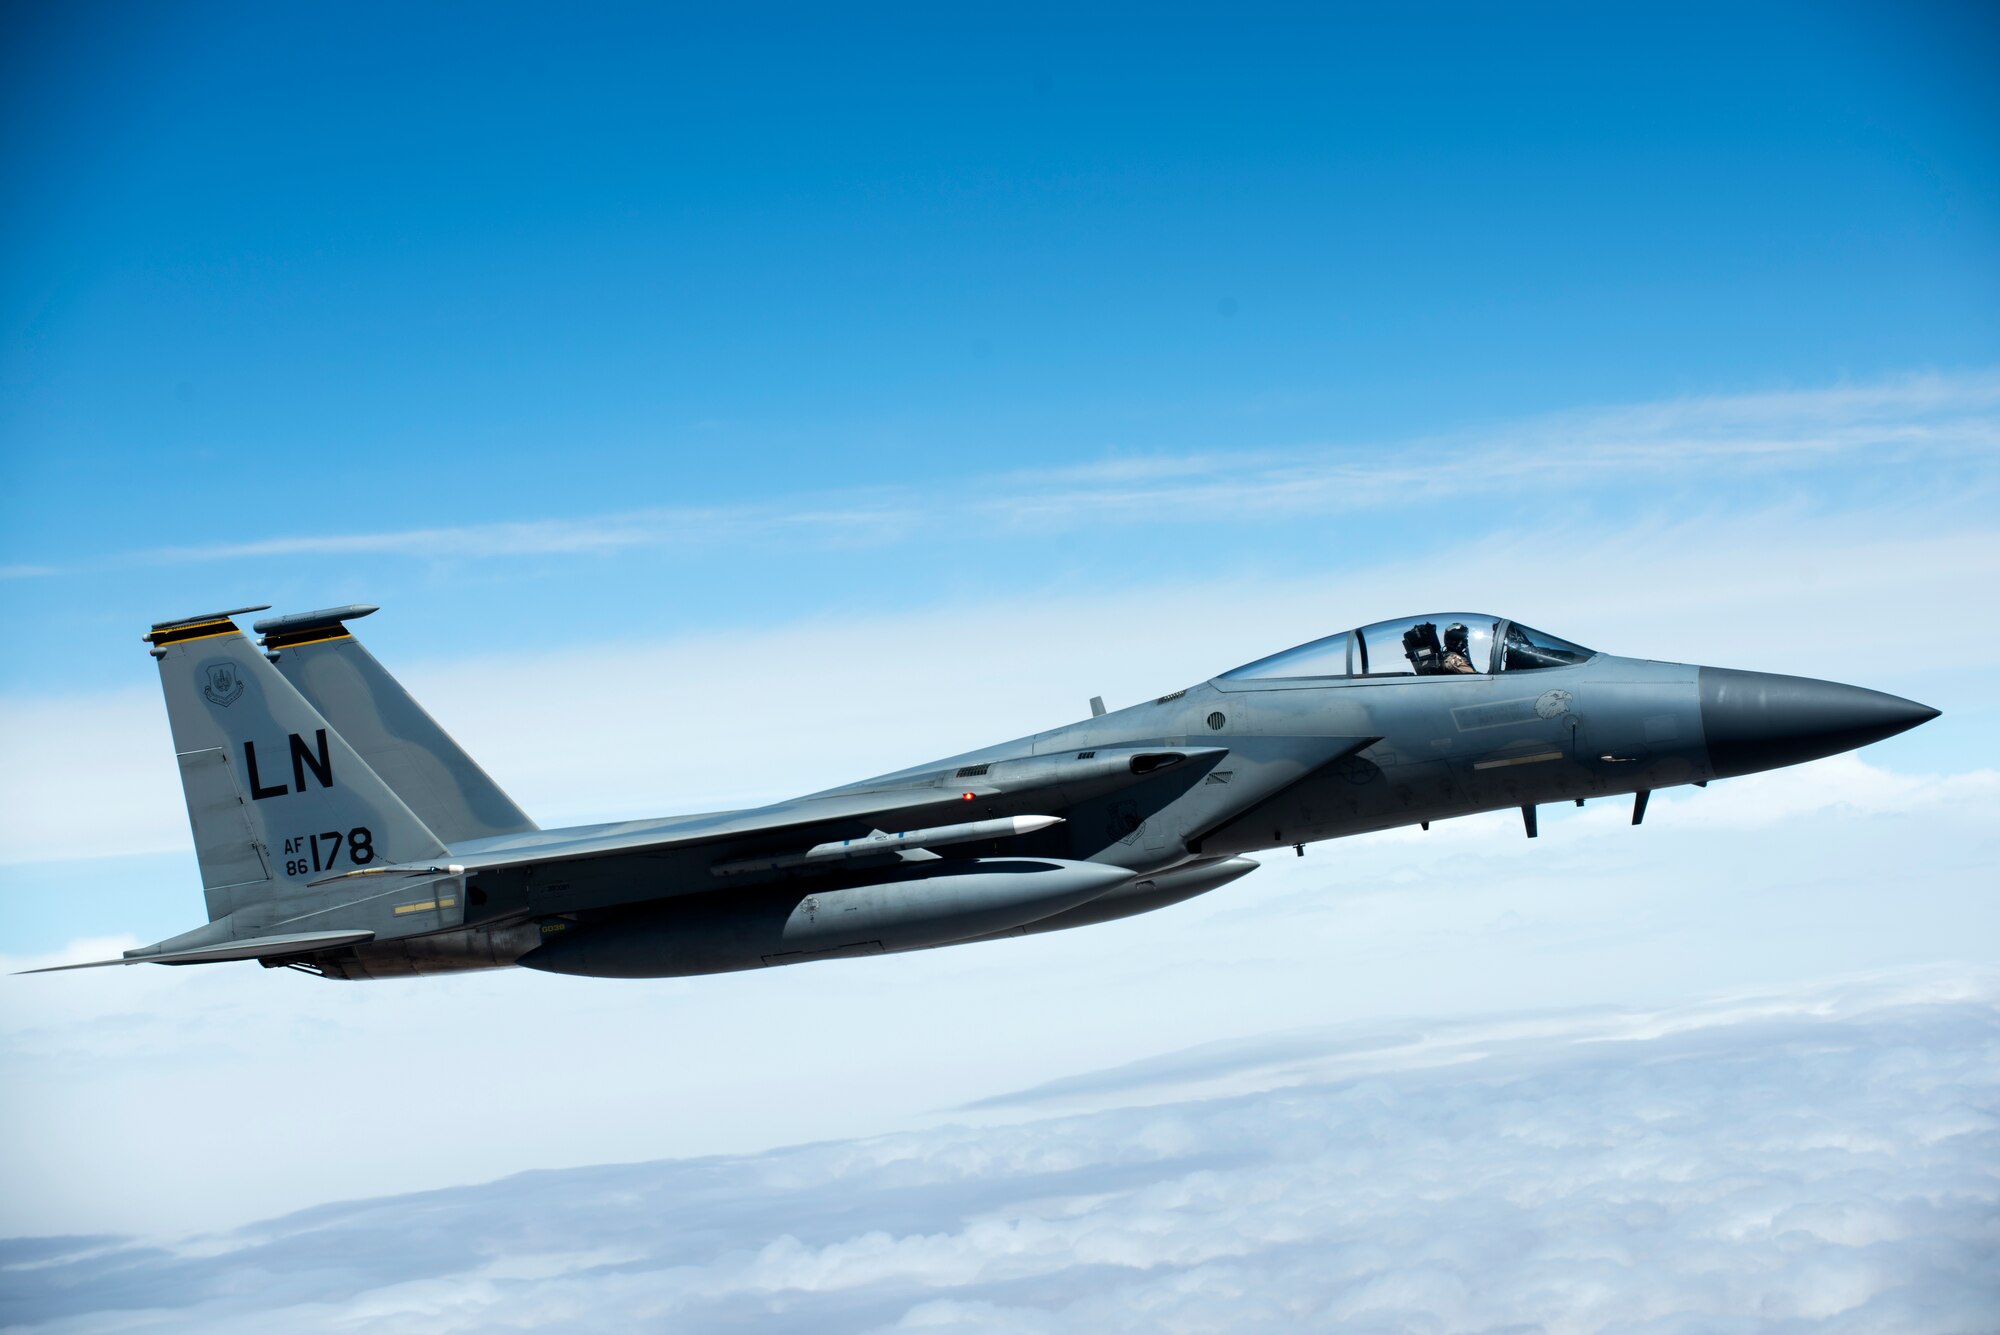 An F-15C Eagles assigned to the 493rd Fighter Squadron flies above Morocco during Exercise African Lion April 20, 2018. Various units from the U.S. Armed Forces will conduct multilateral and stability operations training with units from the Royal Moroccan Armed Forces in the Kingdom of Morocco. This combined multilateral exercise is designed to improve interoperability and mutual understanding of each nation’s tactics, techniques and procedures while demonstrating the strong bond between the nation’s militaries. (U.S. Air Force photo/Senior Airman Malcolm Mayfield)